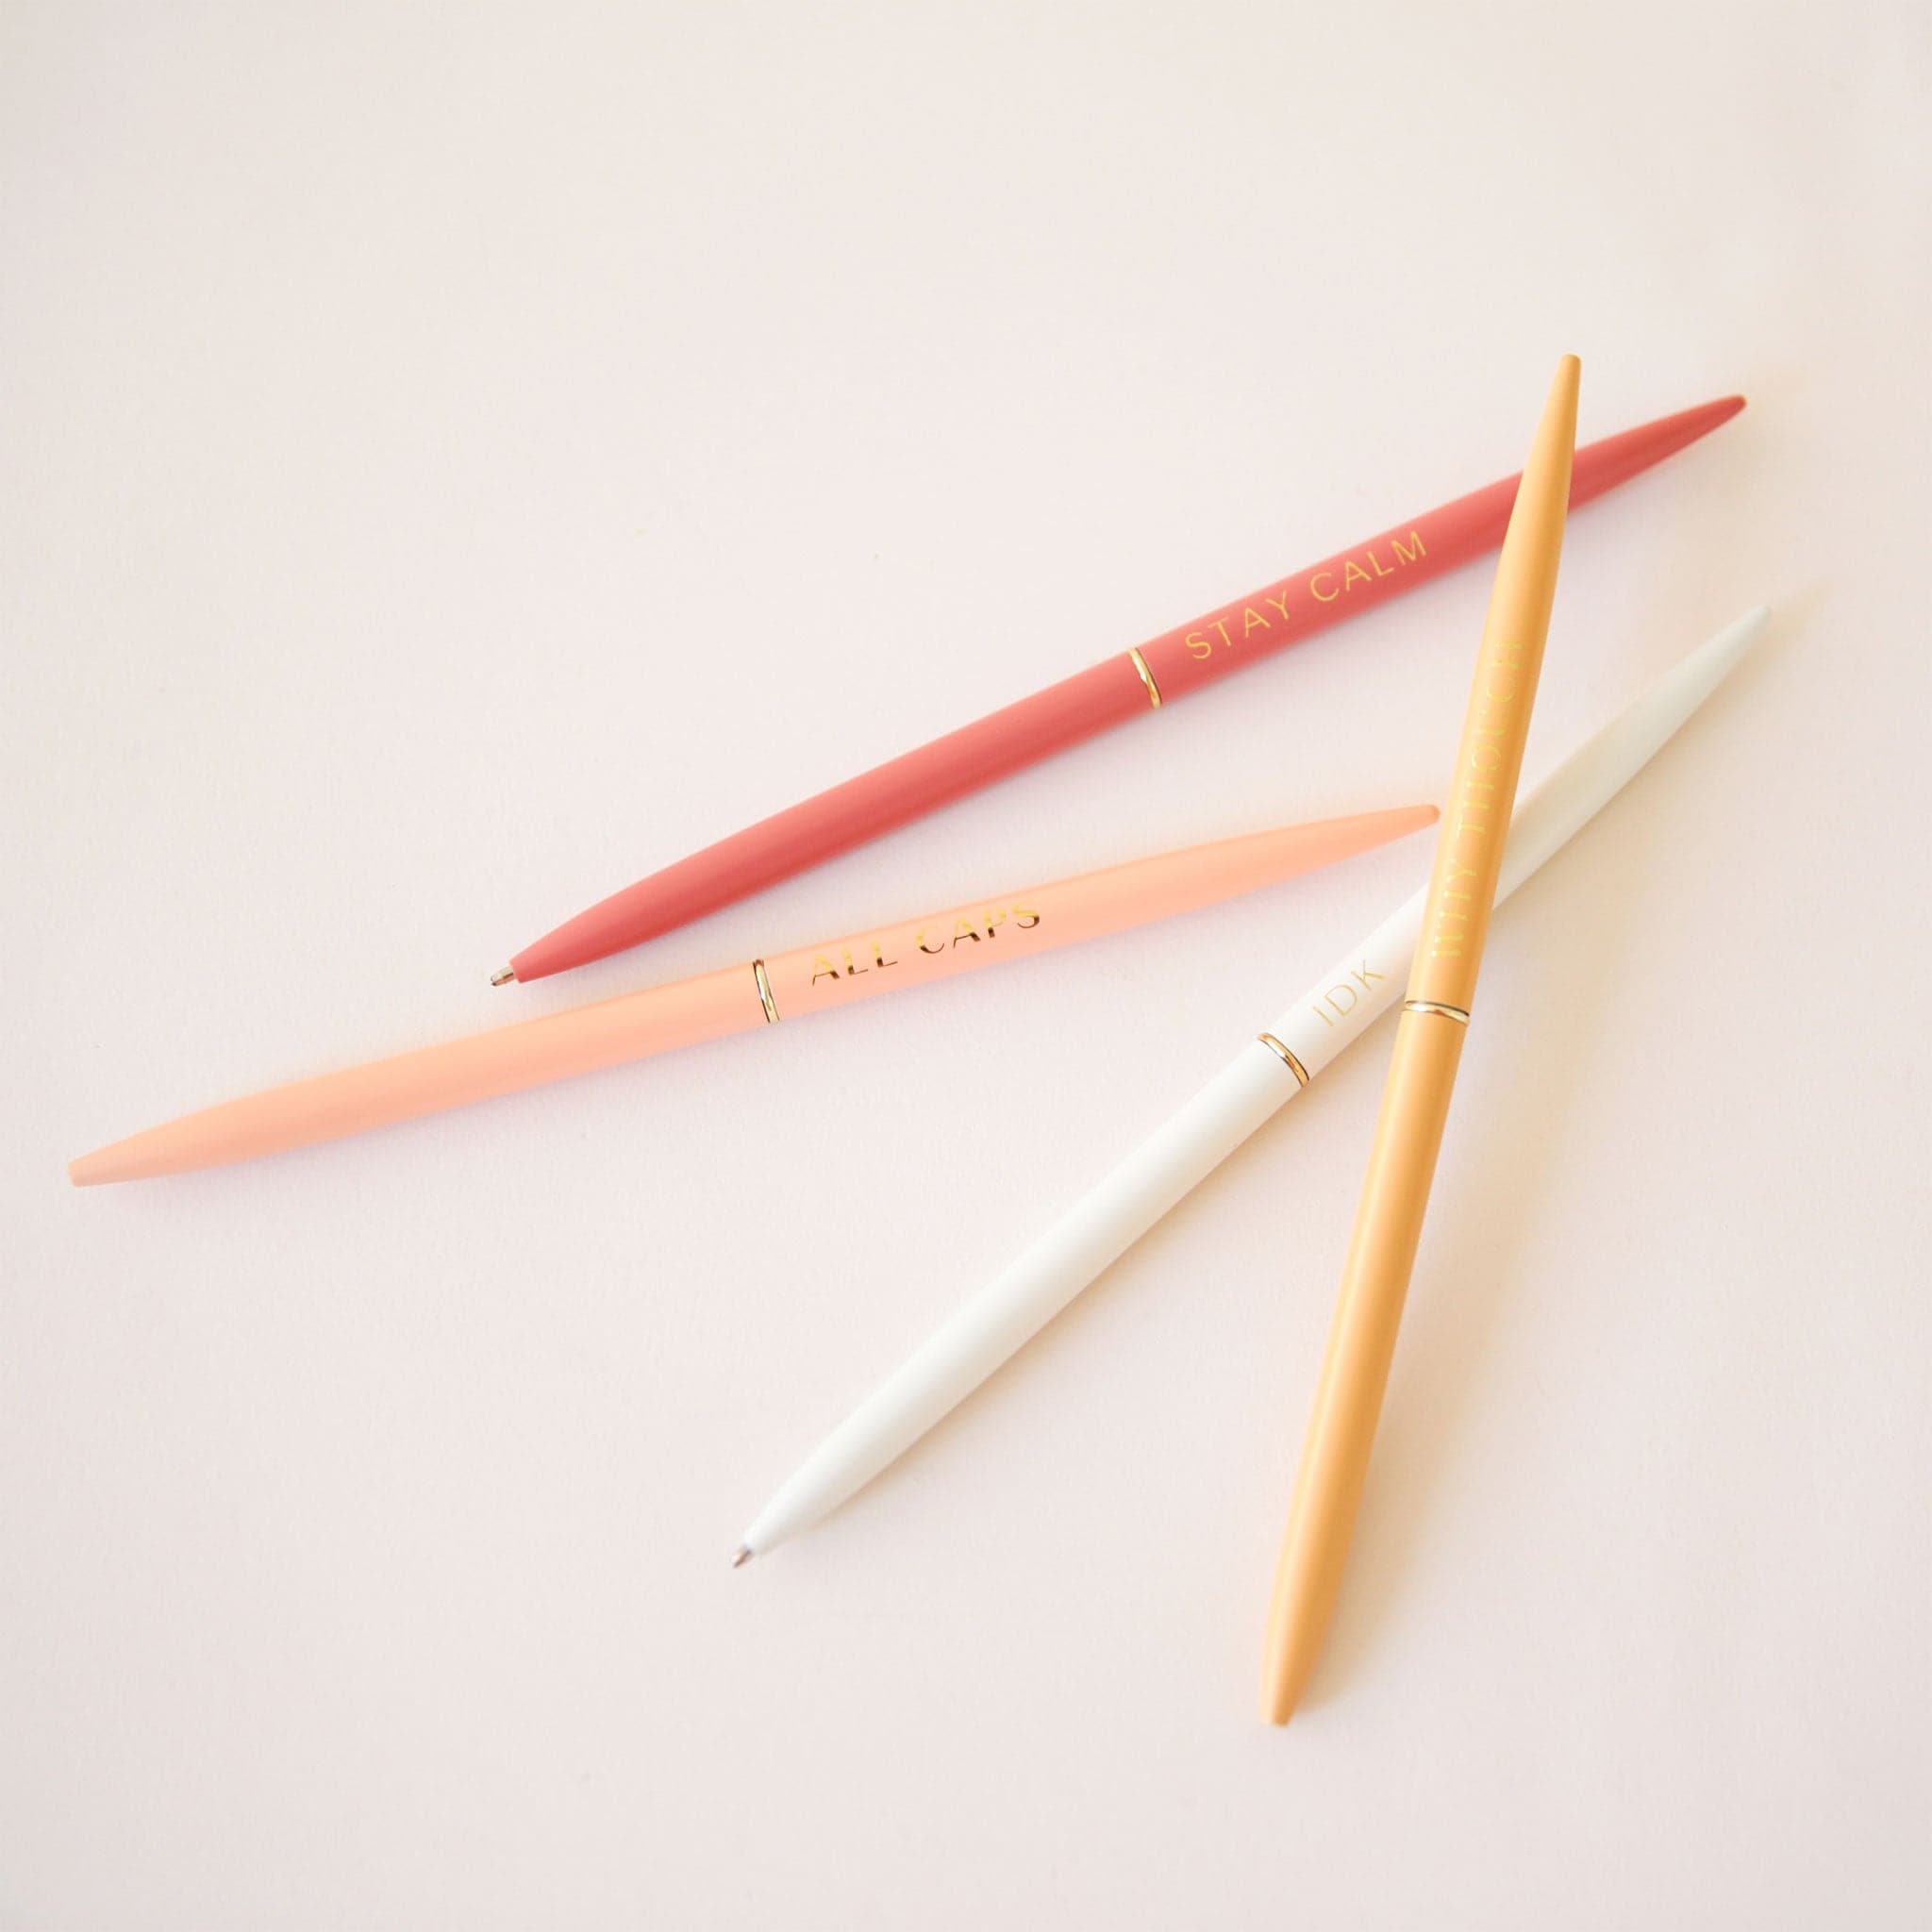 A set of 4 slender pens in yellow, white, salmon and rust. Each pen says something different. The rust pen says, &quot;Stay Calm&quot;. The salmon pen says, &quot;All Caps&quot;. The white pens says, &quot;Idk&quot;. And the yellow pen says, &quot;Why Though&quot;.